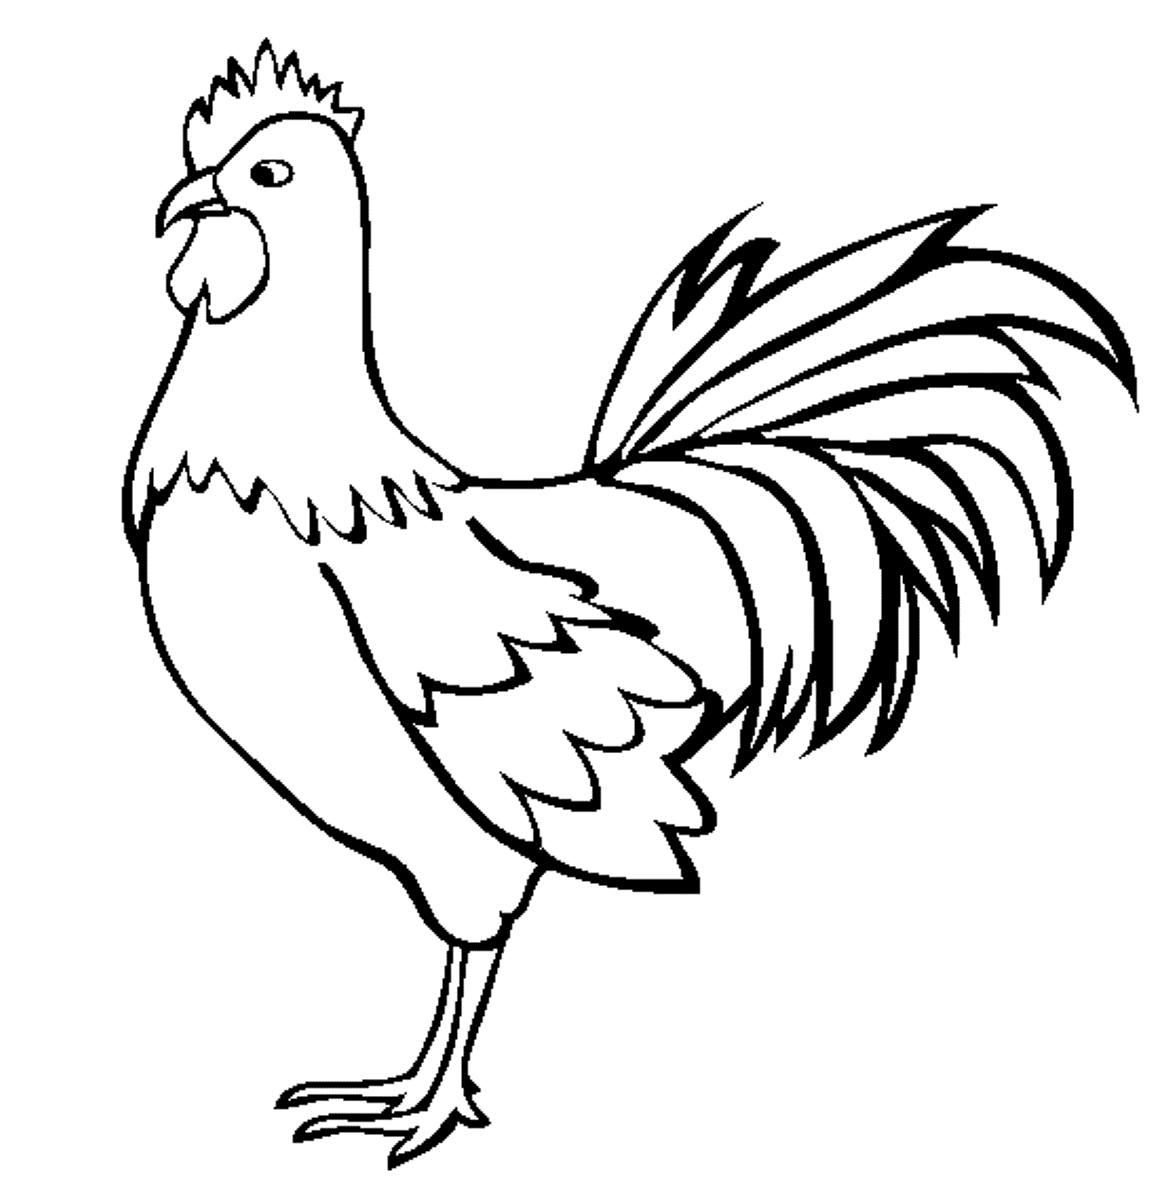 Hen Farm Animals Coloring Pages - Animal Coloring pages of ...